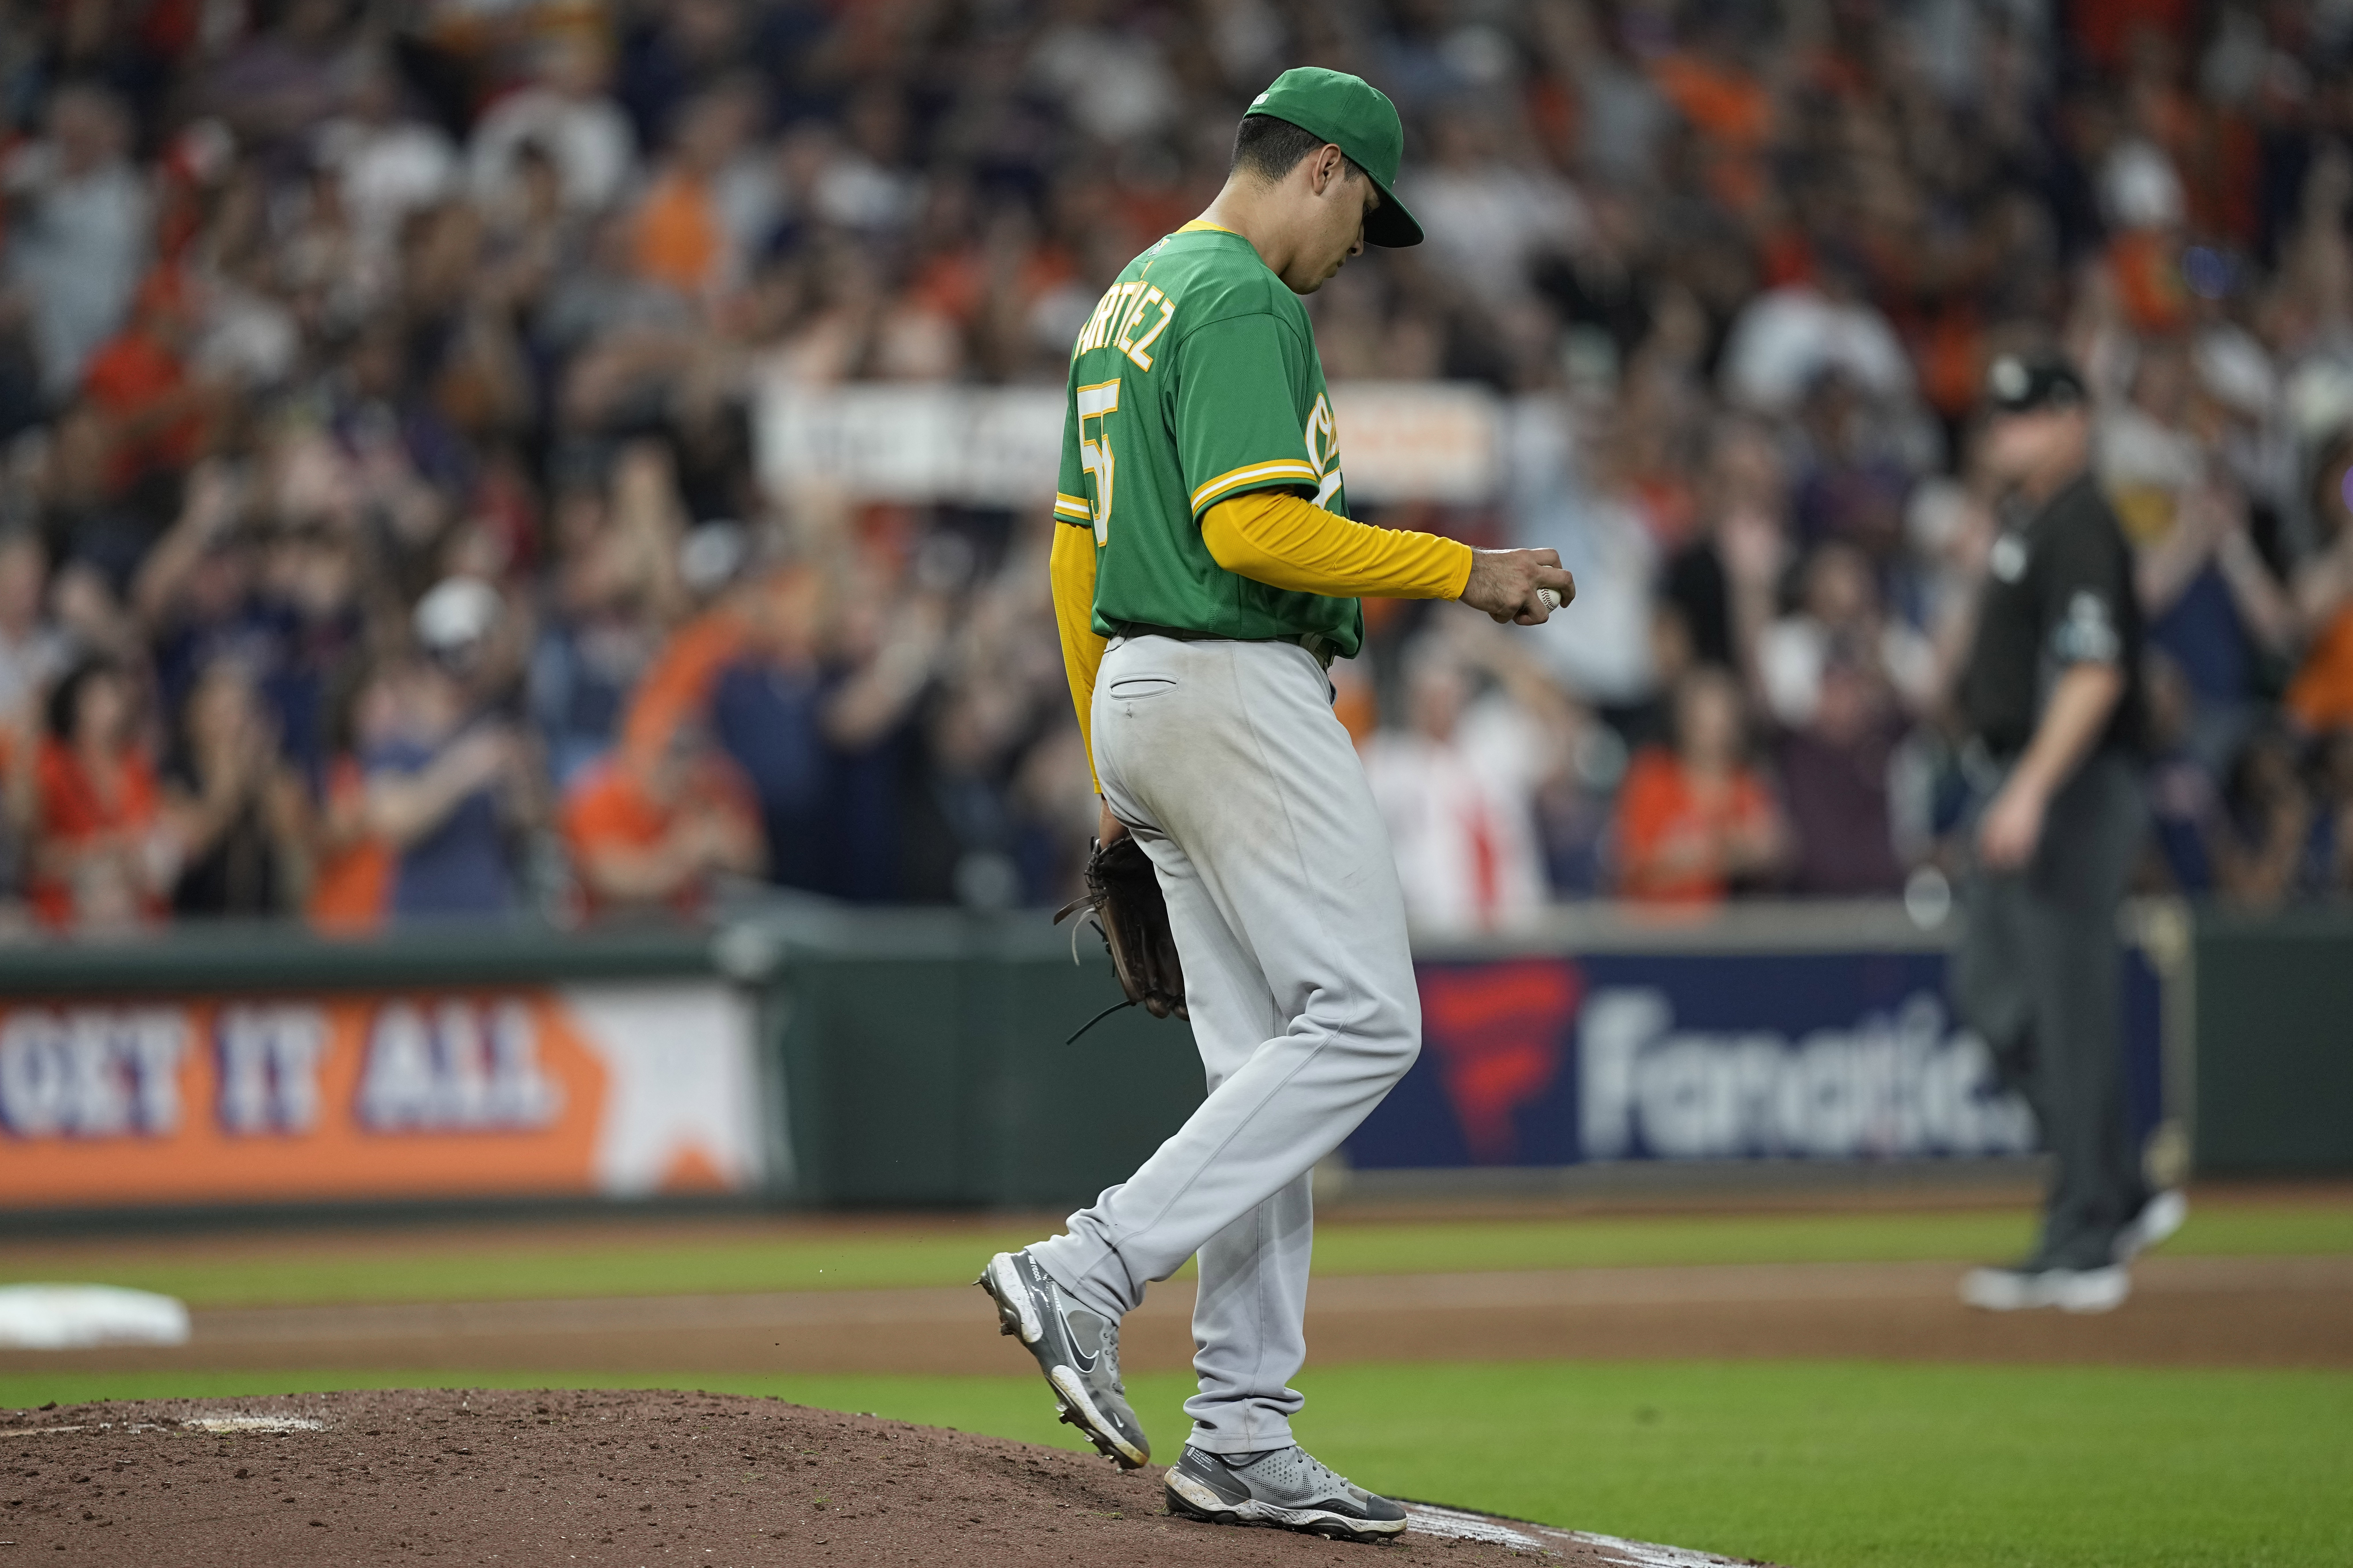 Alvarez has 3 HRs, Astros down A's to clinch playoff berth – KGET 17